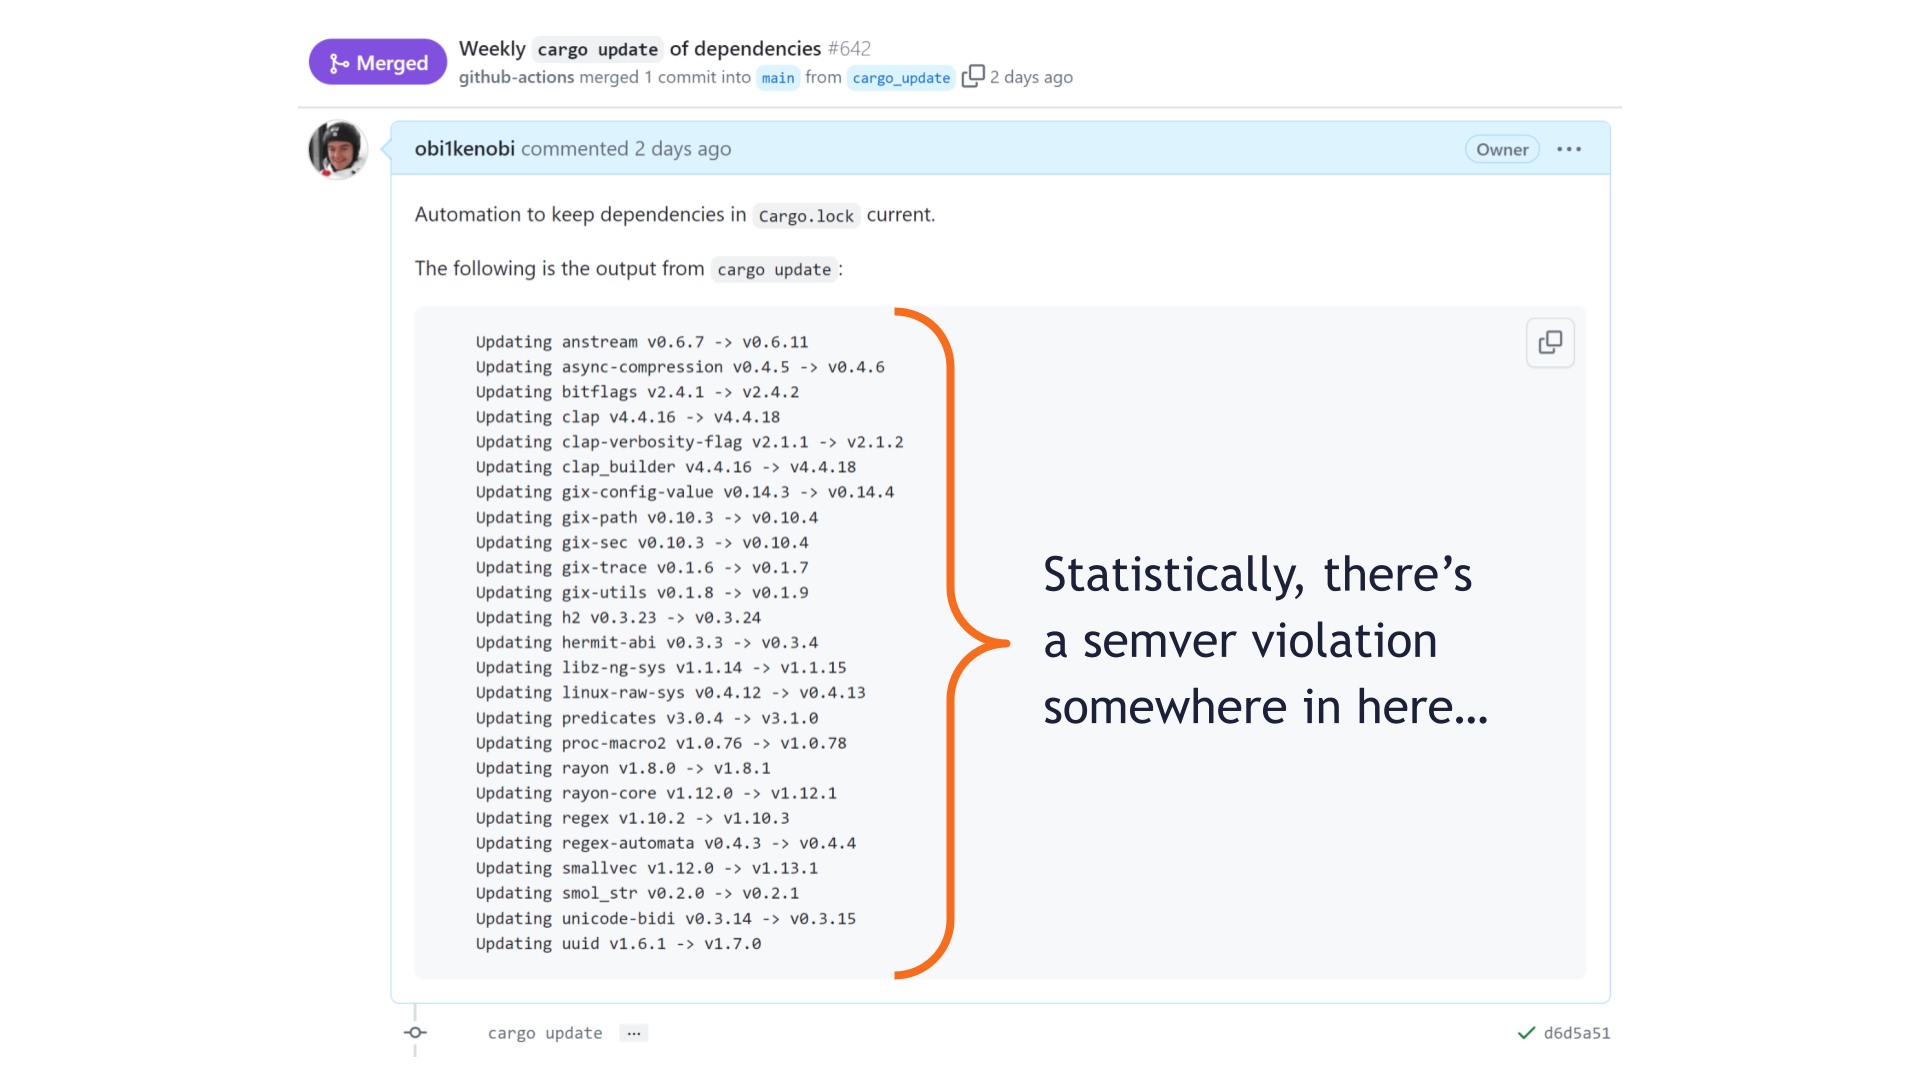 The pull request automatically updating dependencies from earlier in the presentation. An arrow next to the 25 upgraded dependency versions points to the text: "Statistically, there's a SemVer violation somewhere in here..."